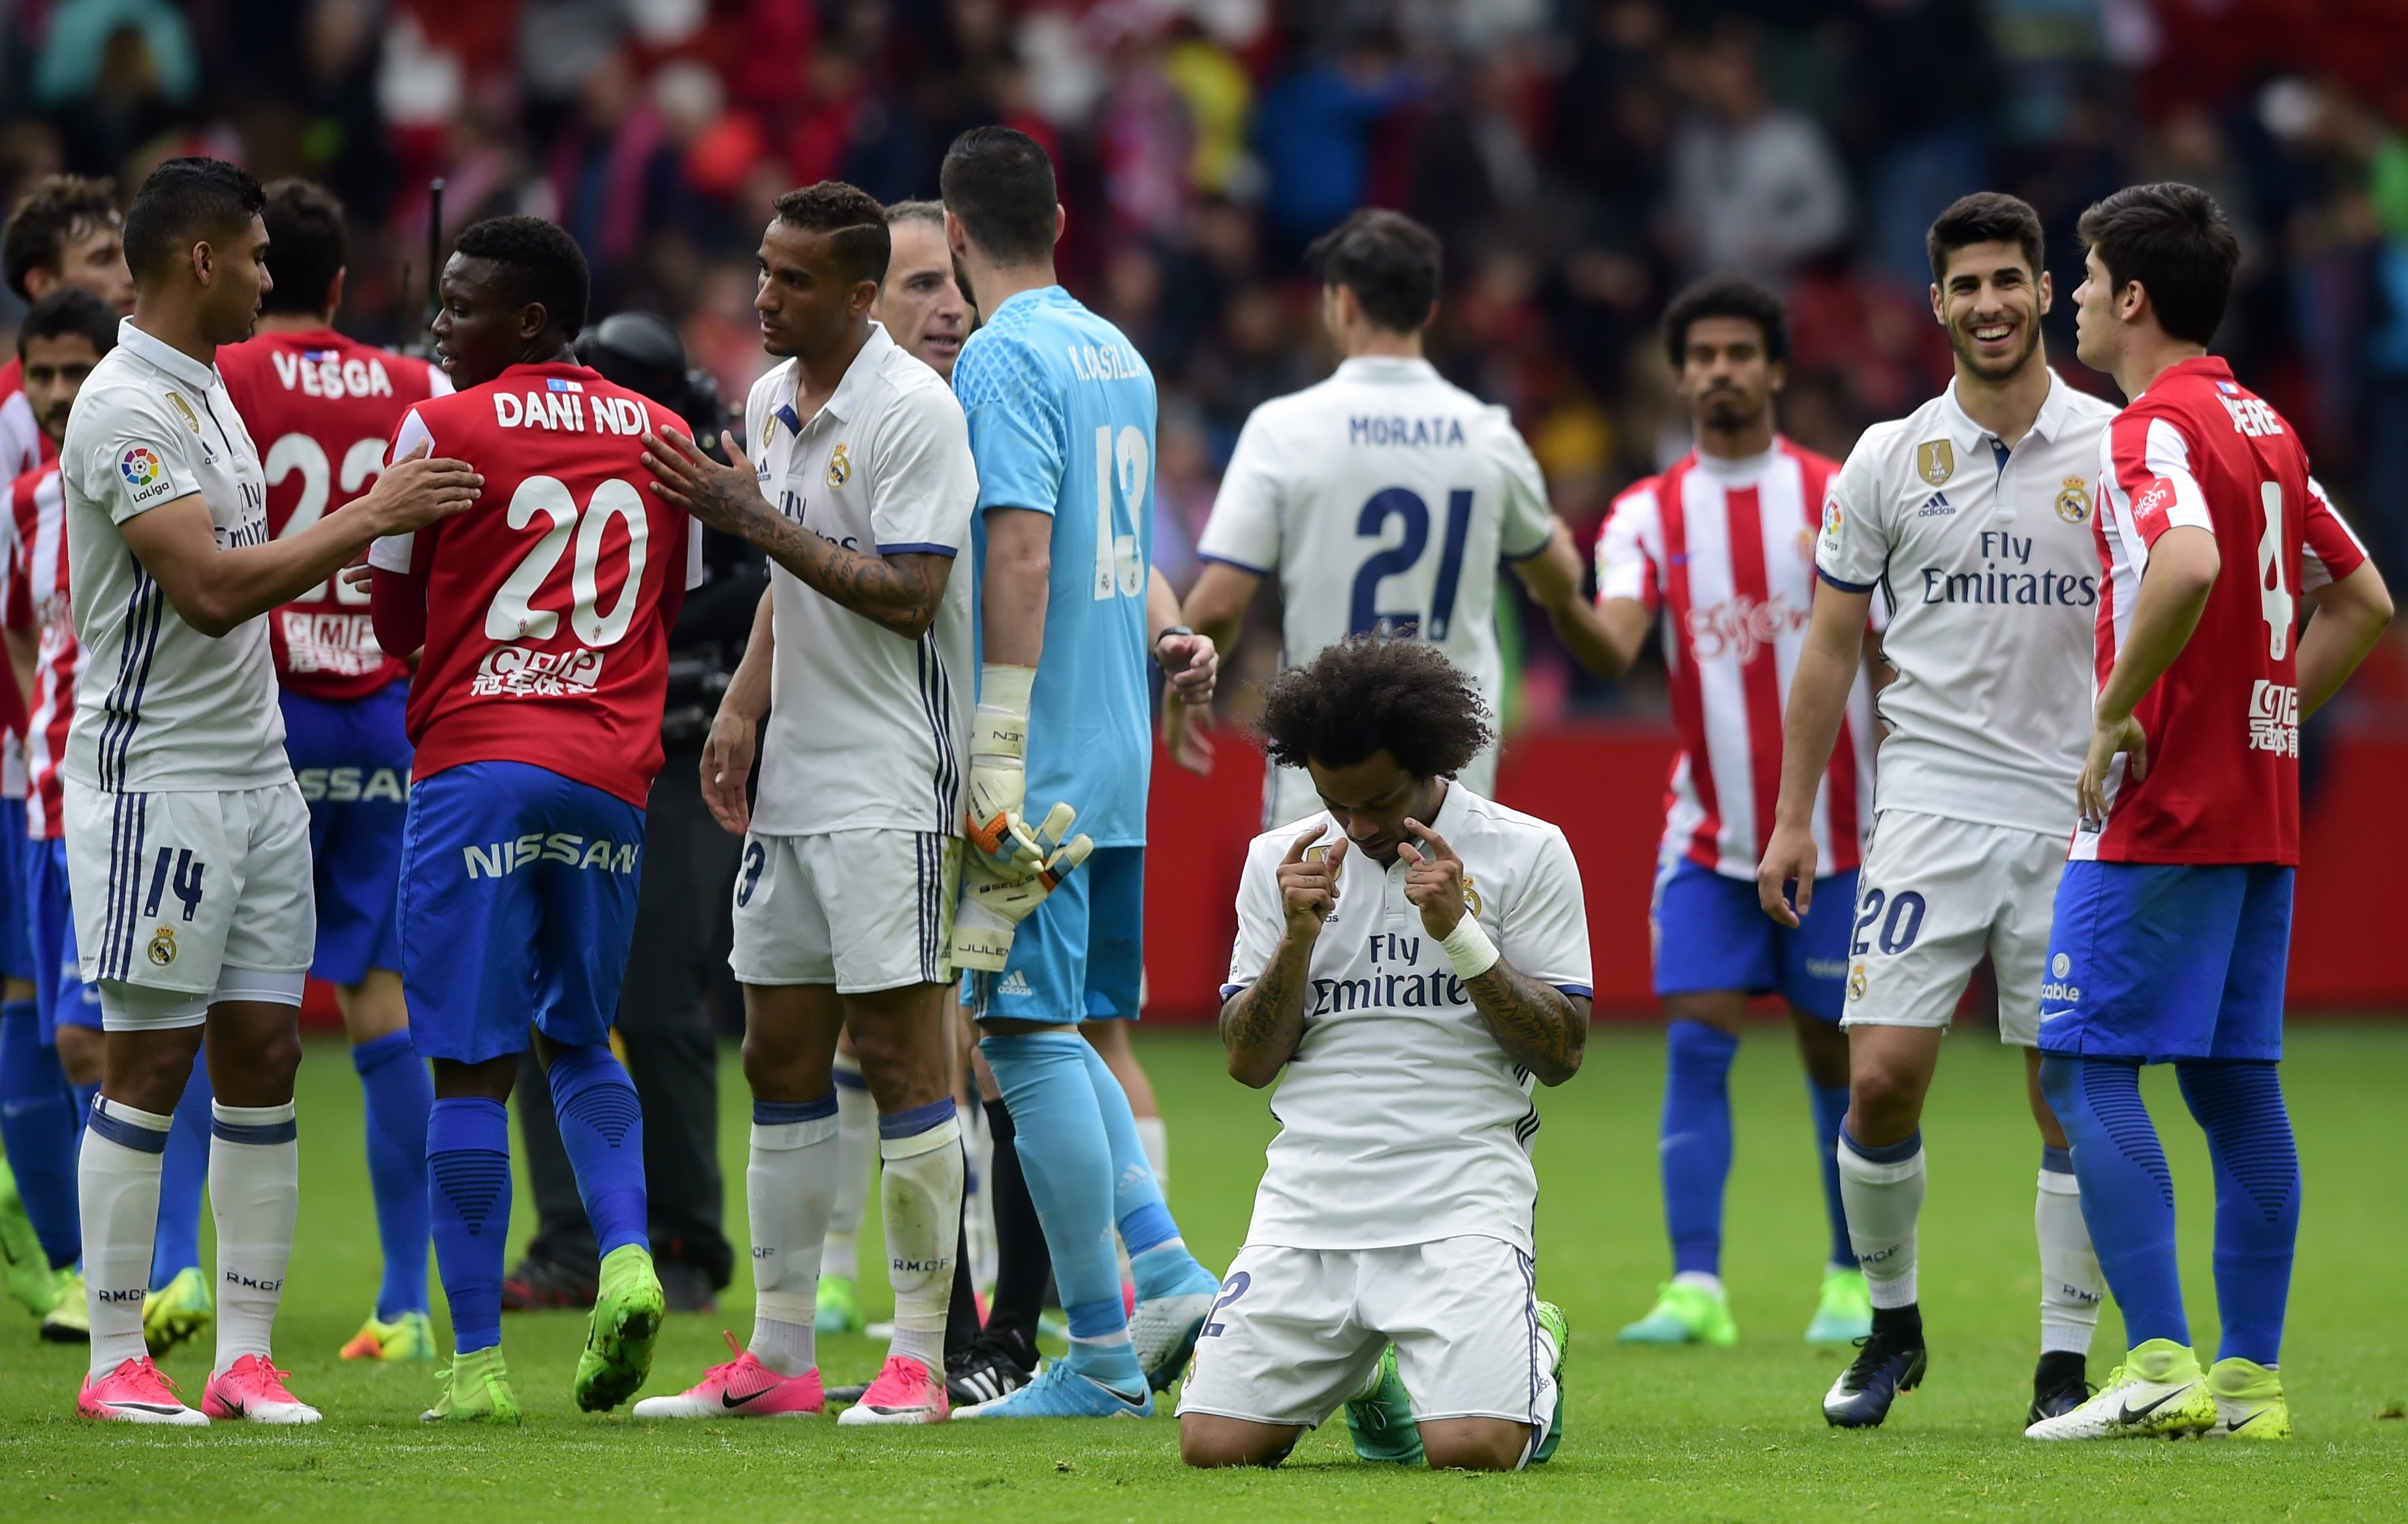 Real Madrid's Brazilian defender Marcelo (C) kneels at the end of the Spanish league football match Real Sporting de Gijon vs Real Madrid CF at El Molinon stadium in Gijon on April 15, 2017. / AFP PHOTO / MIGUEL RIOPA        (Photo credit should read MIGUEL RIOPA/AFP/Getty Images)